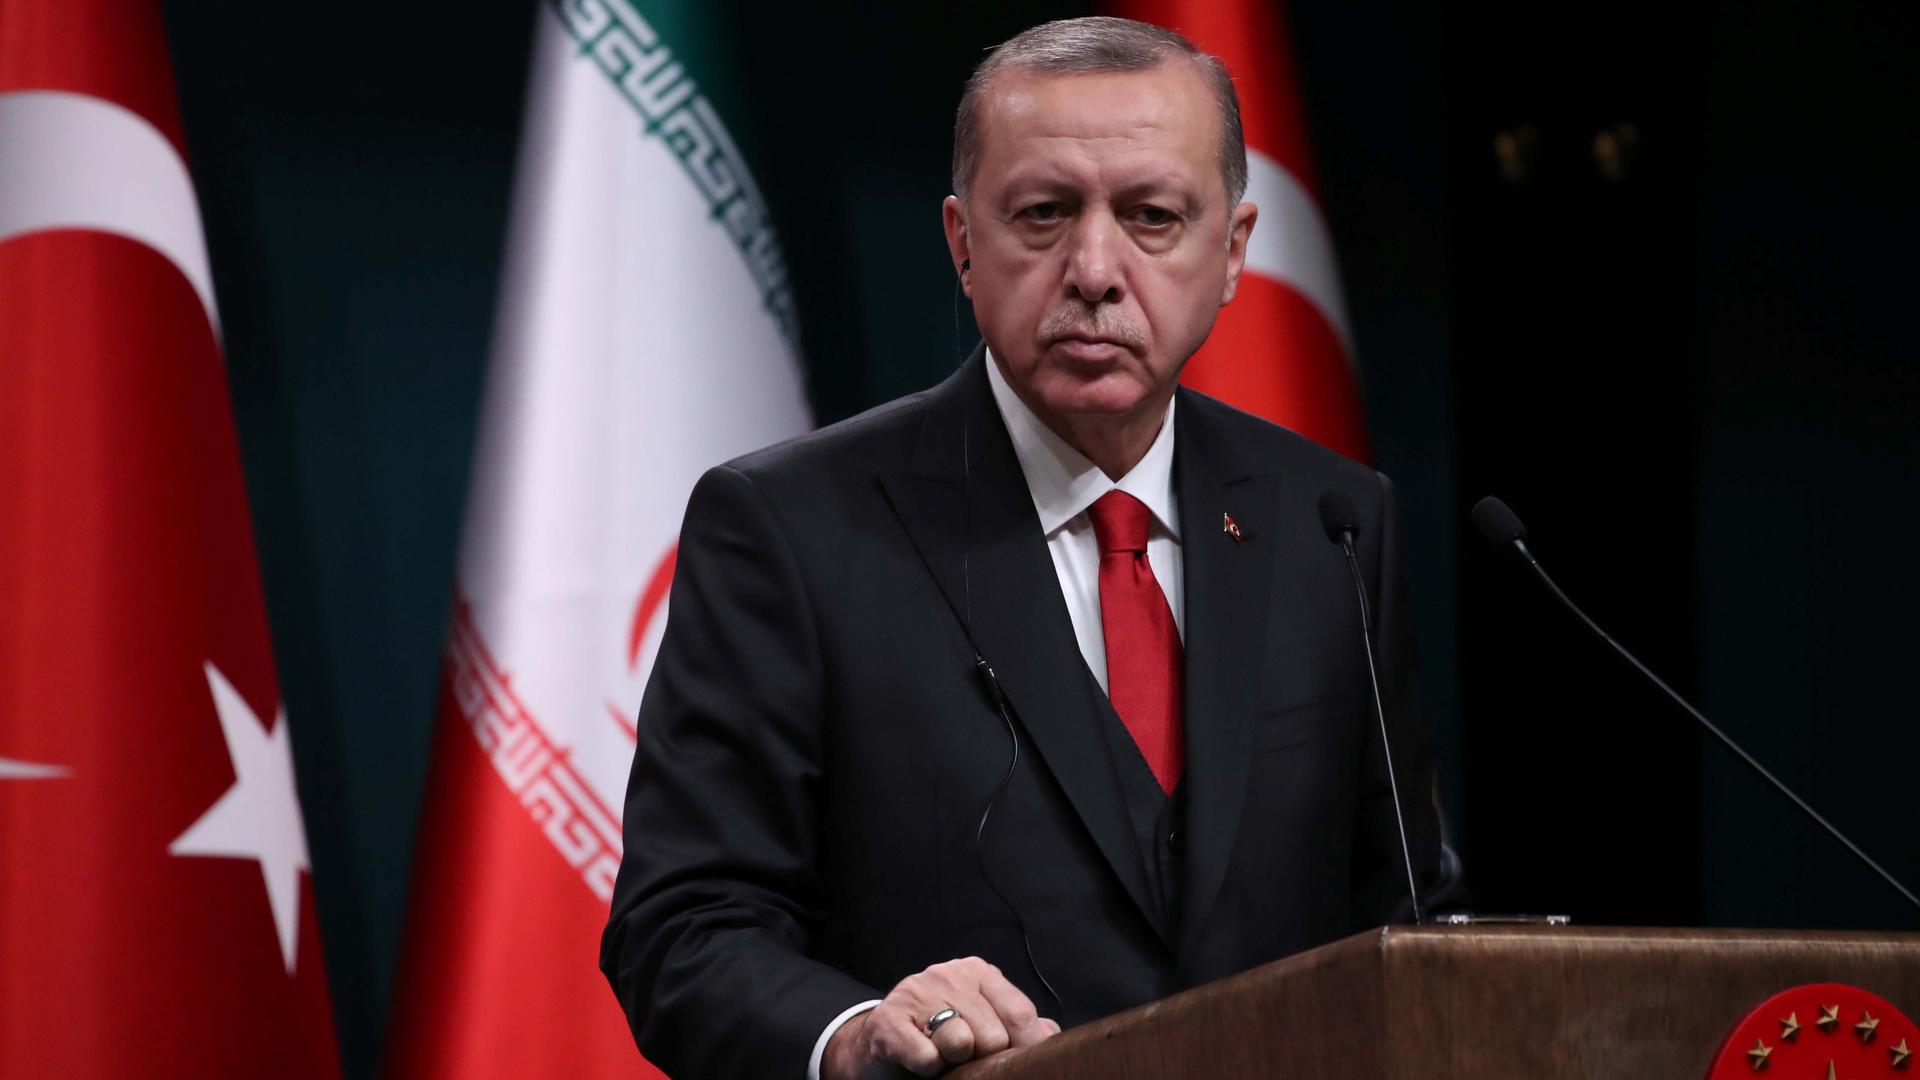 A middle-aged man stands at a podium with the Turkish and Iranian flag behind him.